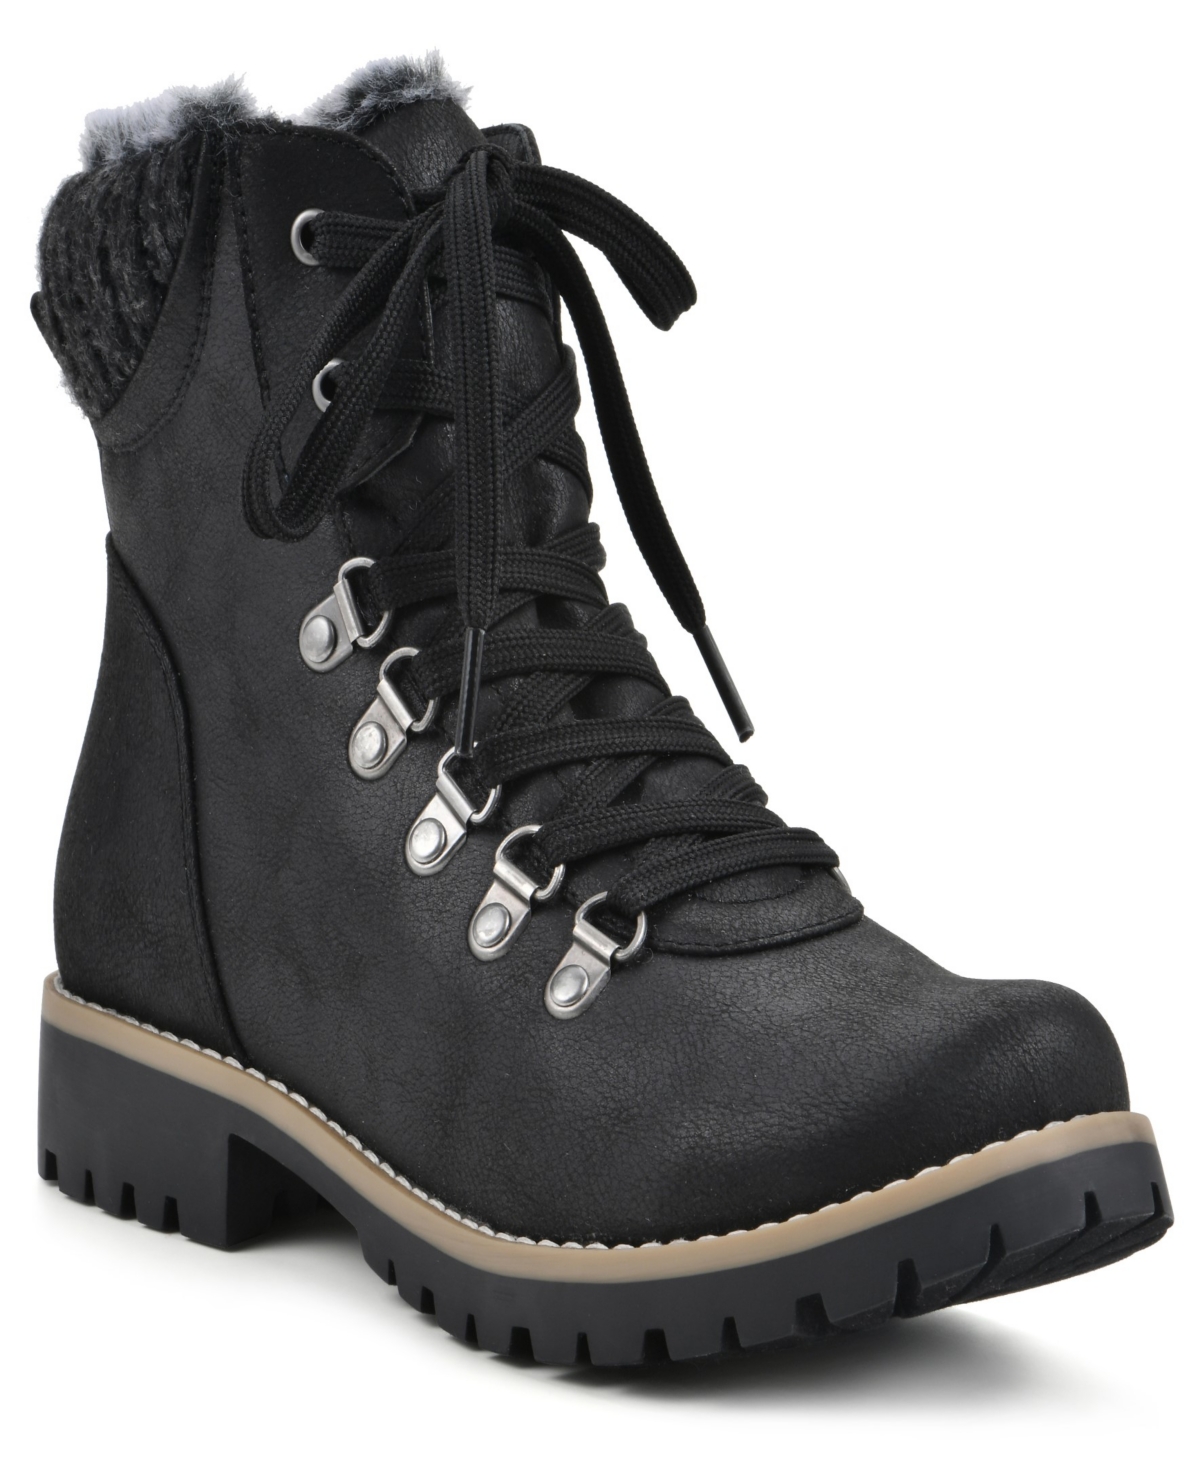 Women's Prized Lace-Up Hiker Booties - Black Fabric